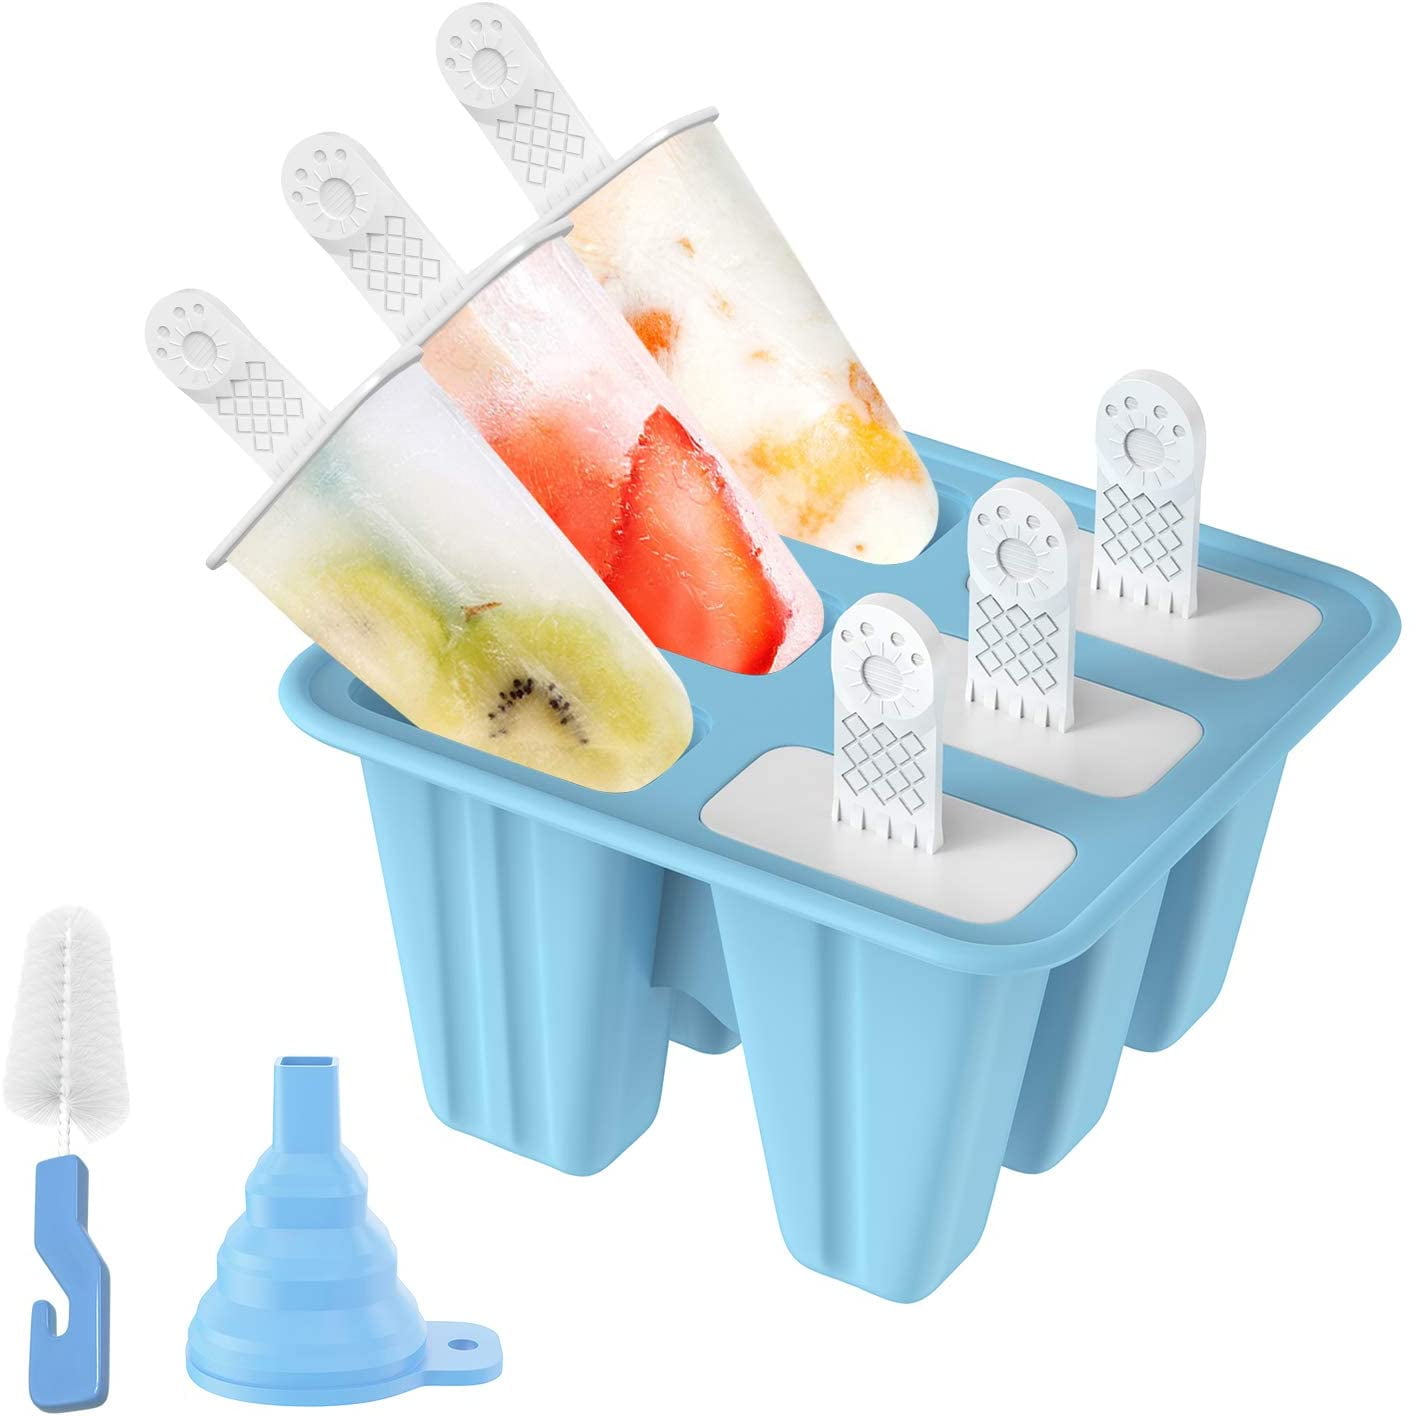 6 Pieces Silicone Ice Pop Molds BPA Free Popsicle Mold Reusable Easy Release Ice Pop Maker with Silicone Funnel and Cleaning Brush Blue Popsicle Molds 